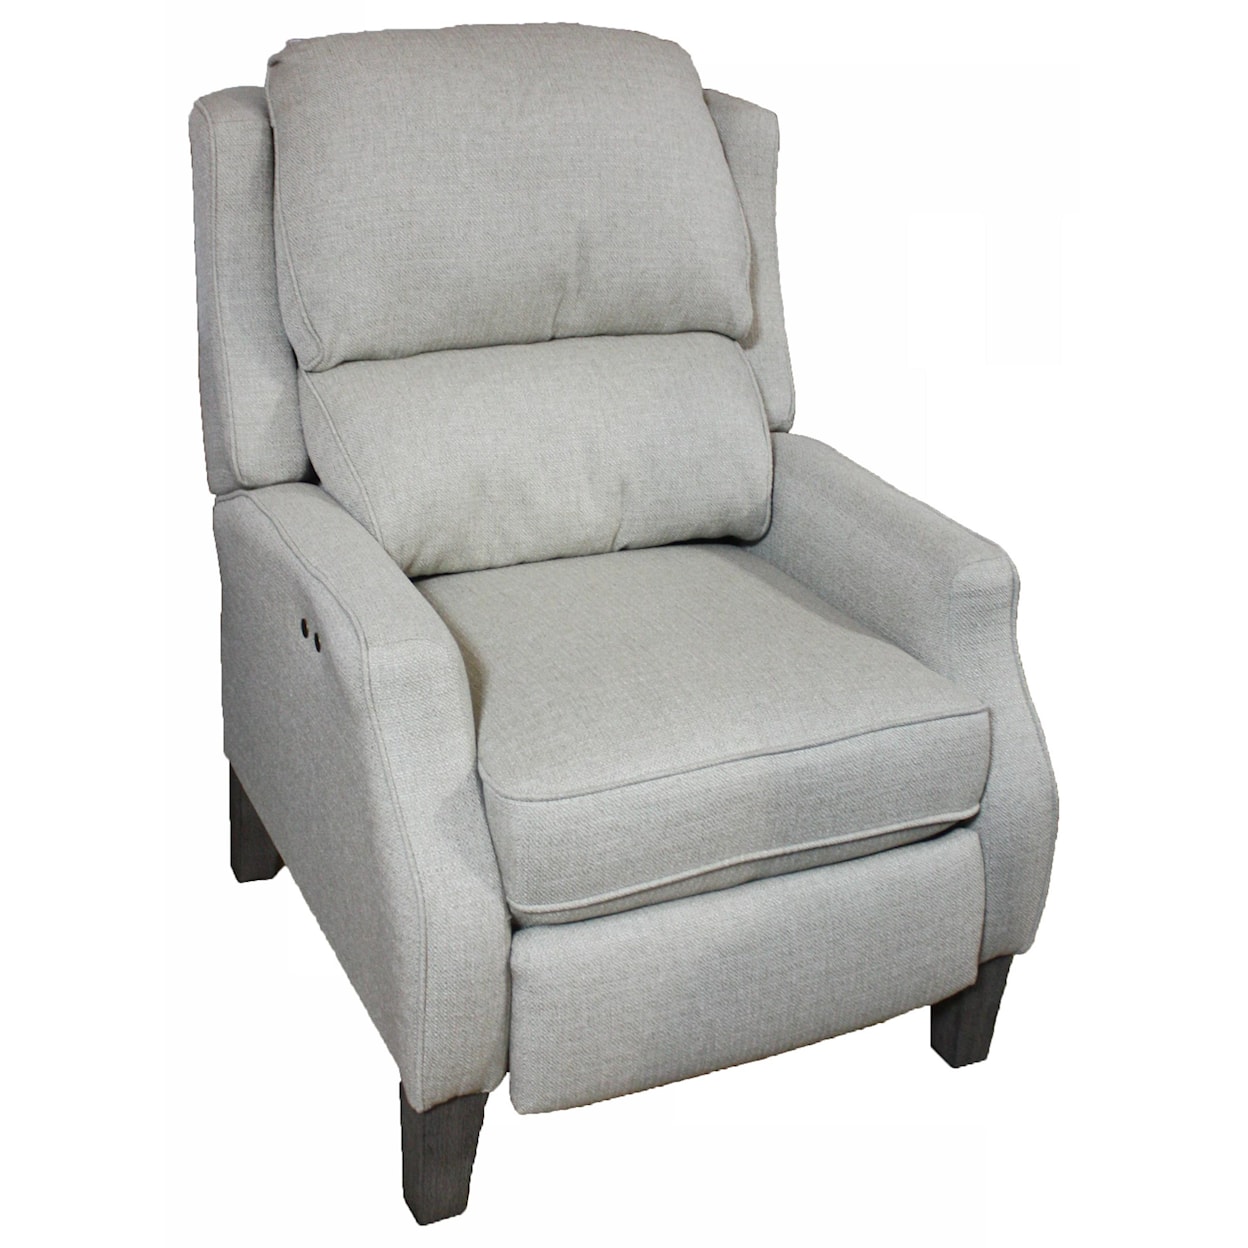 Best Home Furnishings Pushback Recliners Power Recliner